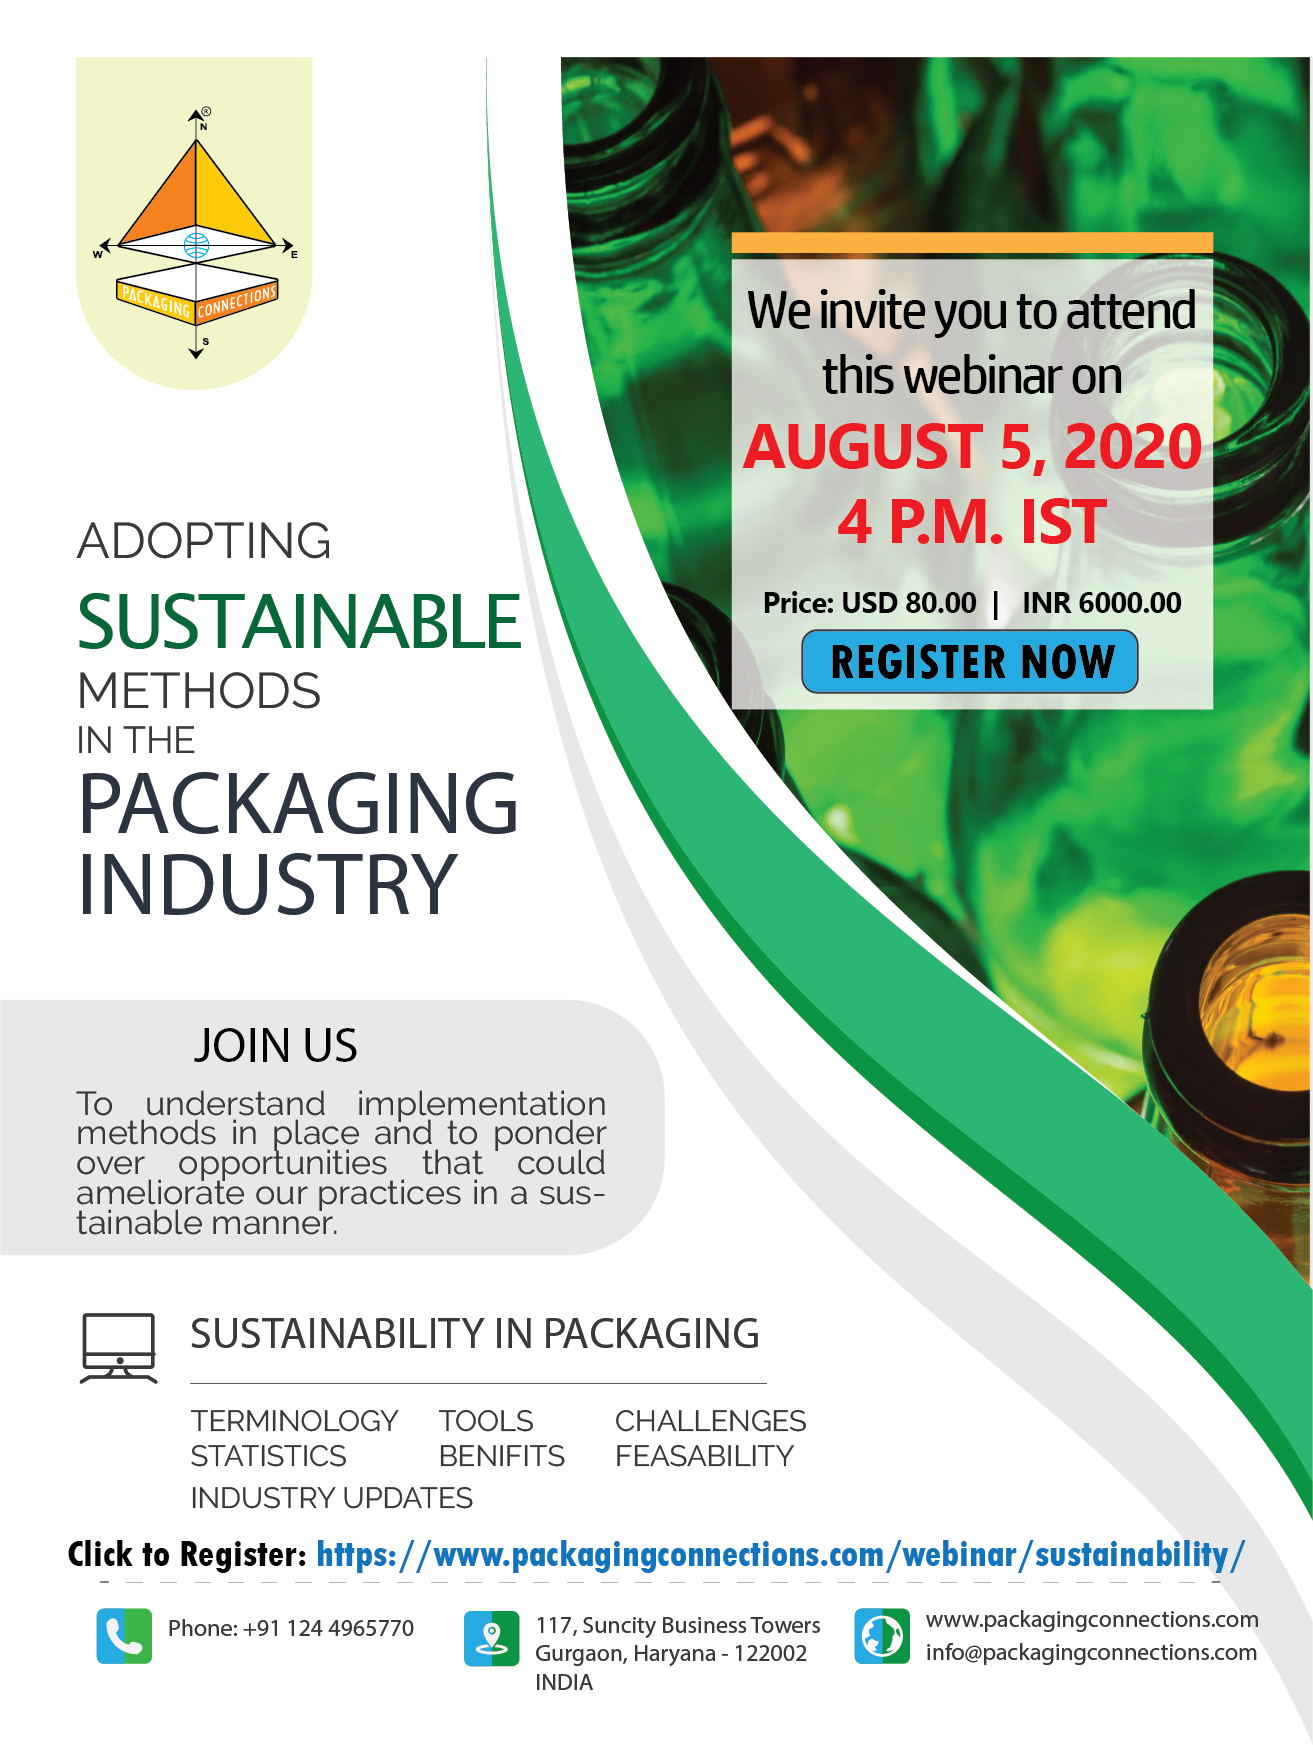 PackagingConnections Webinar on Sustainability in Packaging